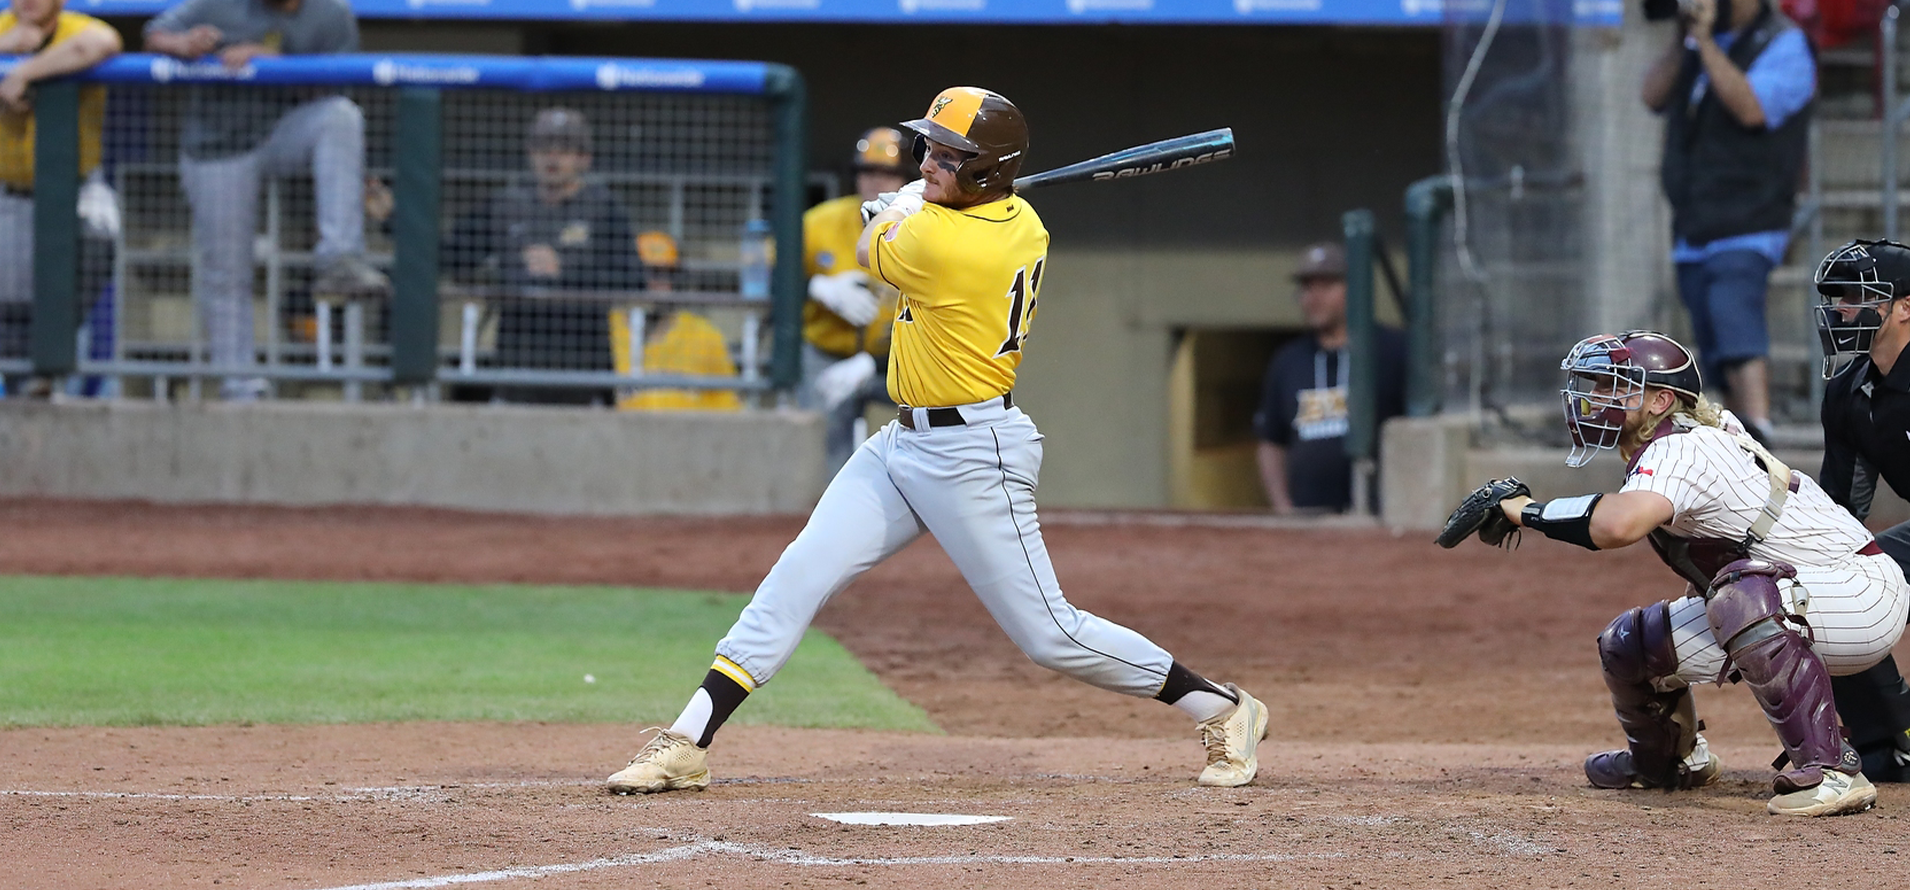 BW Ends Season With Loss to Trinity (Texas) in NCAA World Series